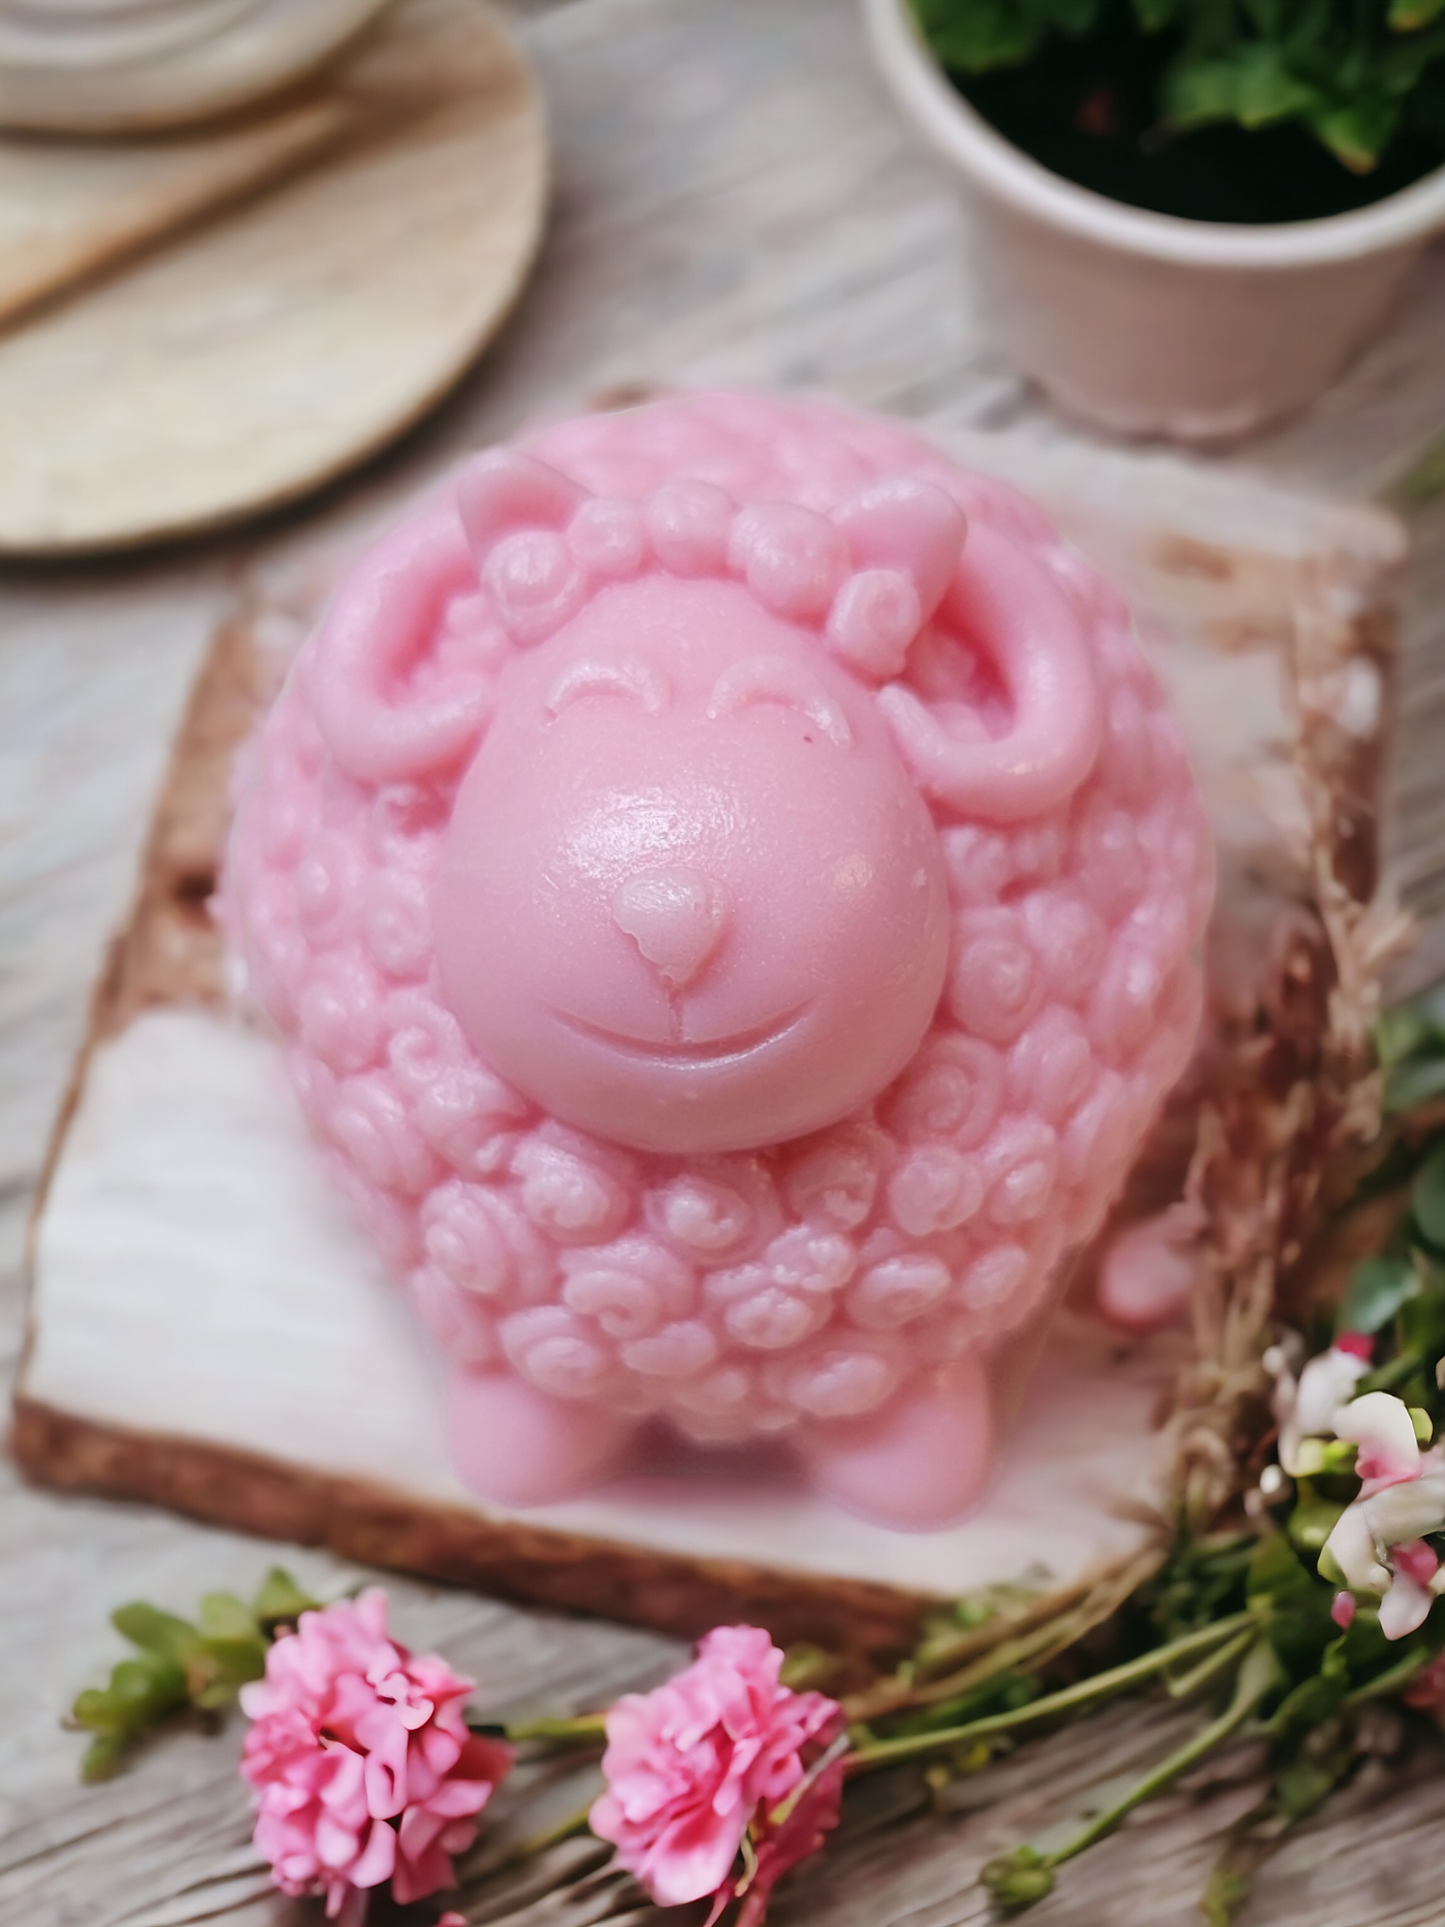 Spring's Collection: Purebred Goat Milk Soap - Pink